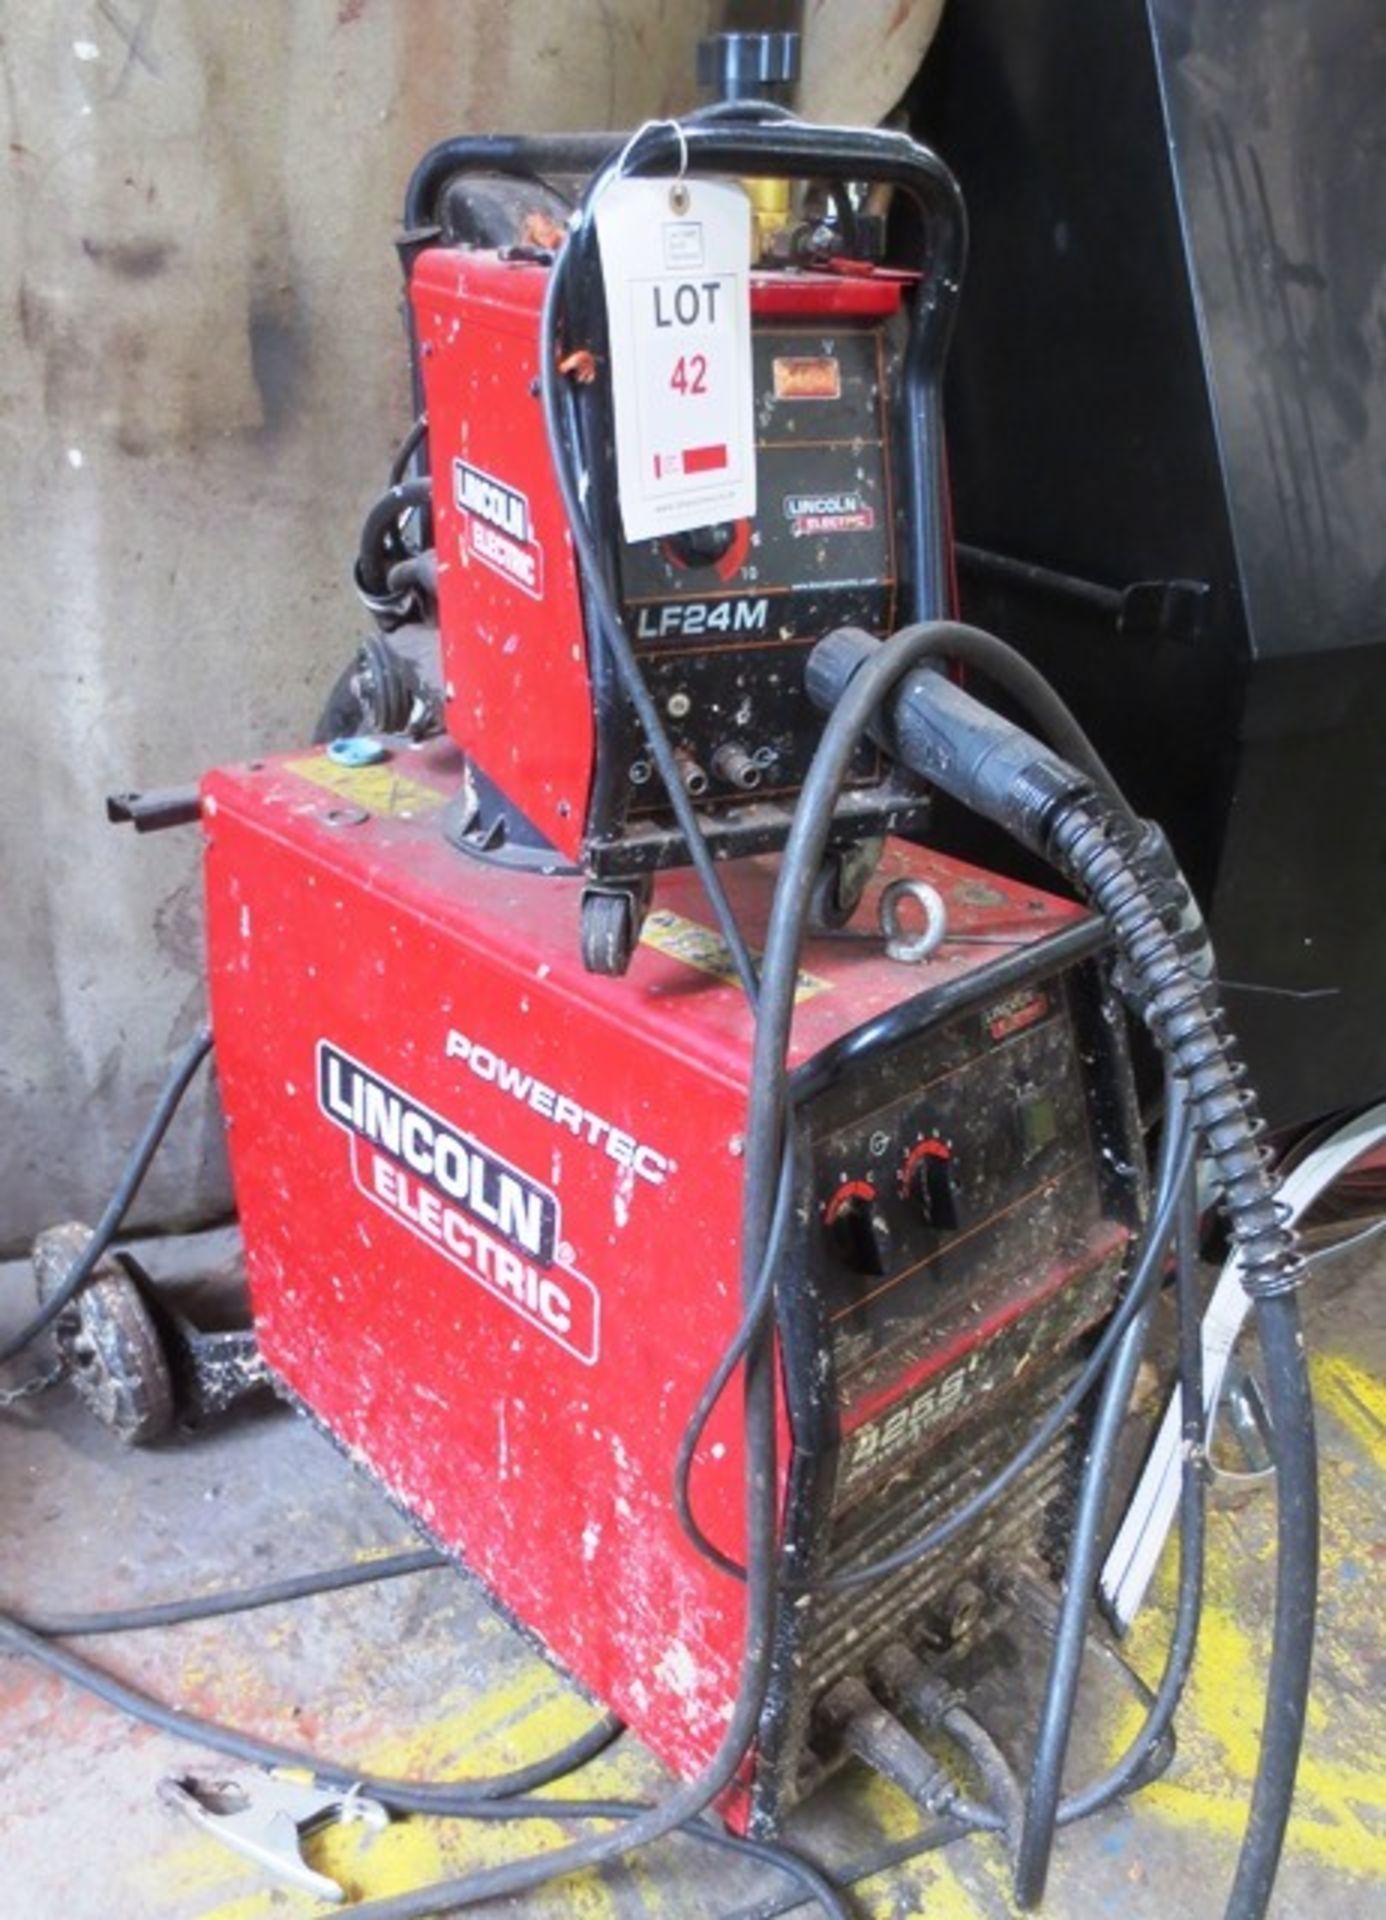 Lincoln Electric Powertec 425x mig welder, s/n: P1120200599, with Lincoln Electric LF24M wire